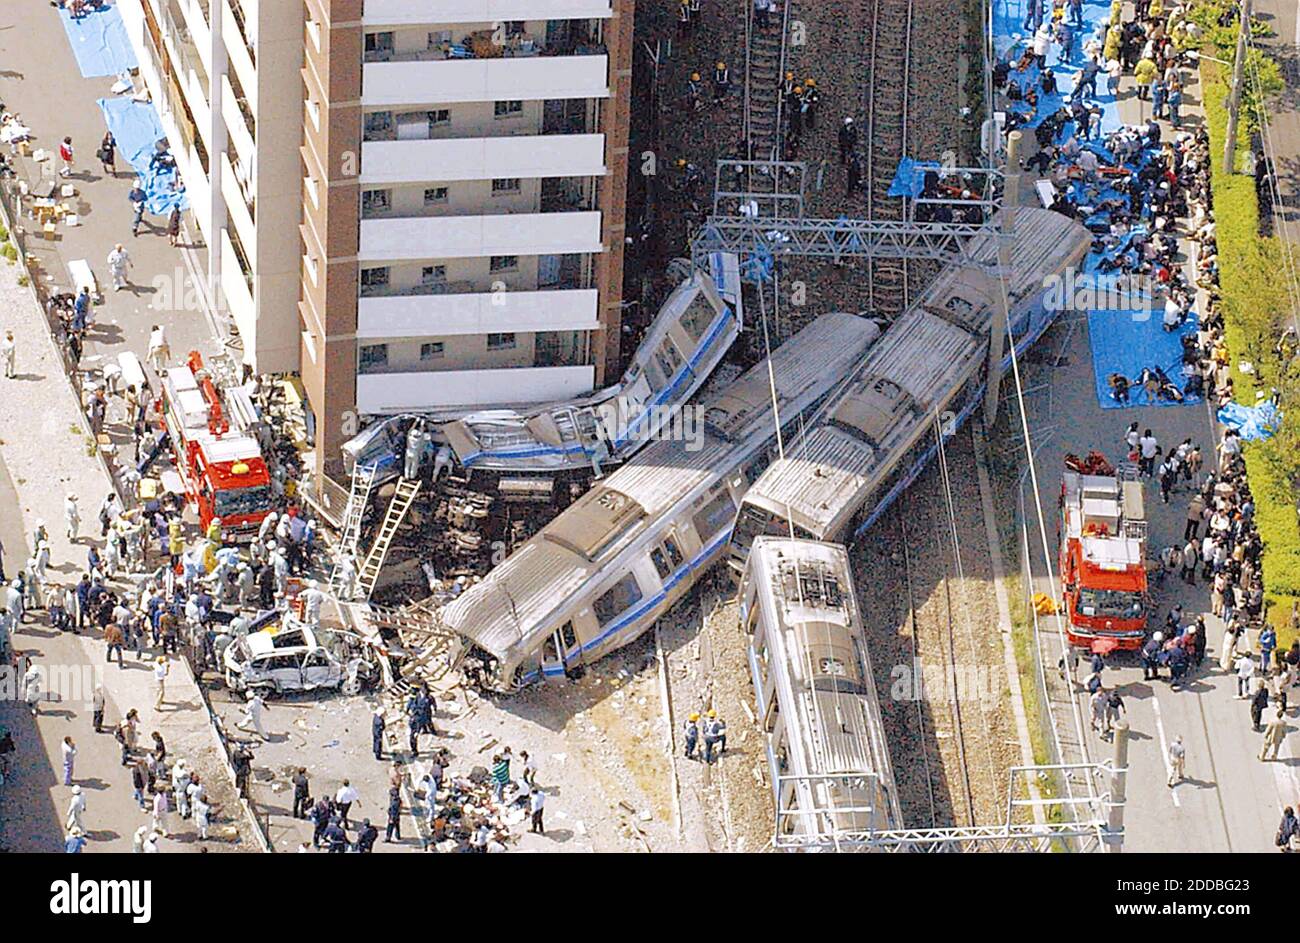 NO FILM, NO VIDEO, NO TV, NO DOCUMENTARY - A seven-car train on the JR Fukuchiyama line derailed and crashed into an apartment building Monday morning, April 25, 2005, in Amagasaki, Hyogo Prefecture, Japan. The crash killed 50 people and injured 417 in the worst railroad accident in Japan in 40 years. Photo by Yomiuri Shimbun/KRT/ABACA. Stock Photo